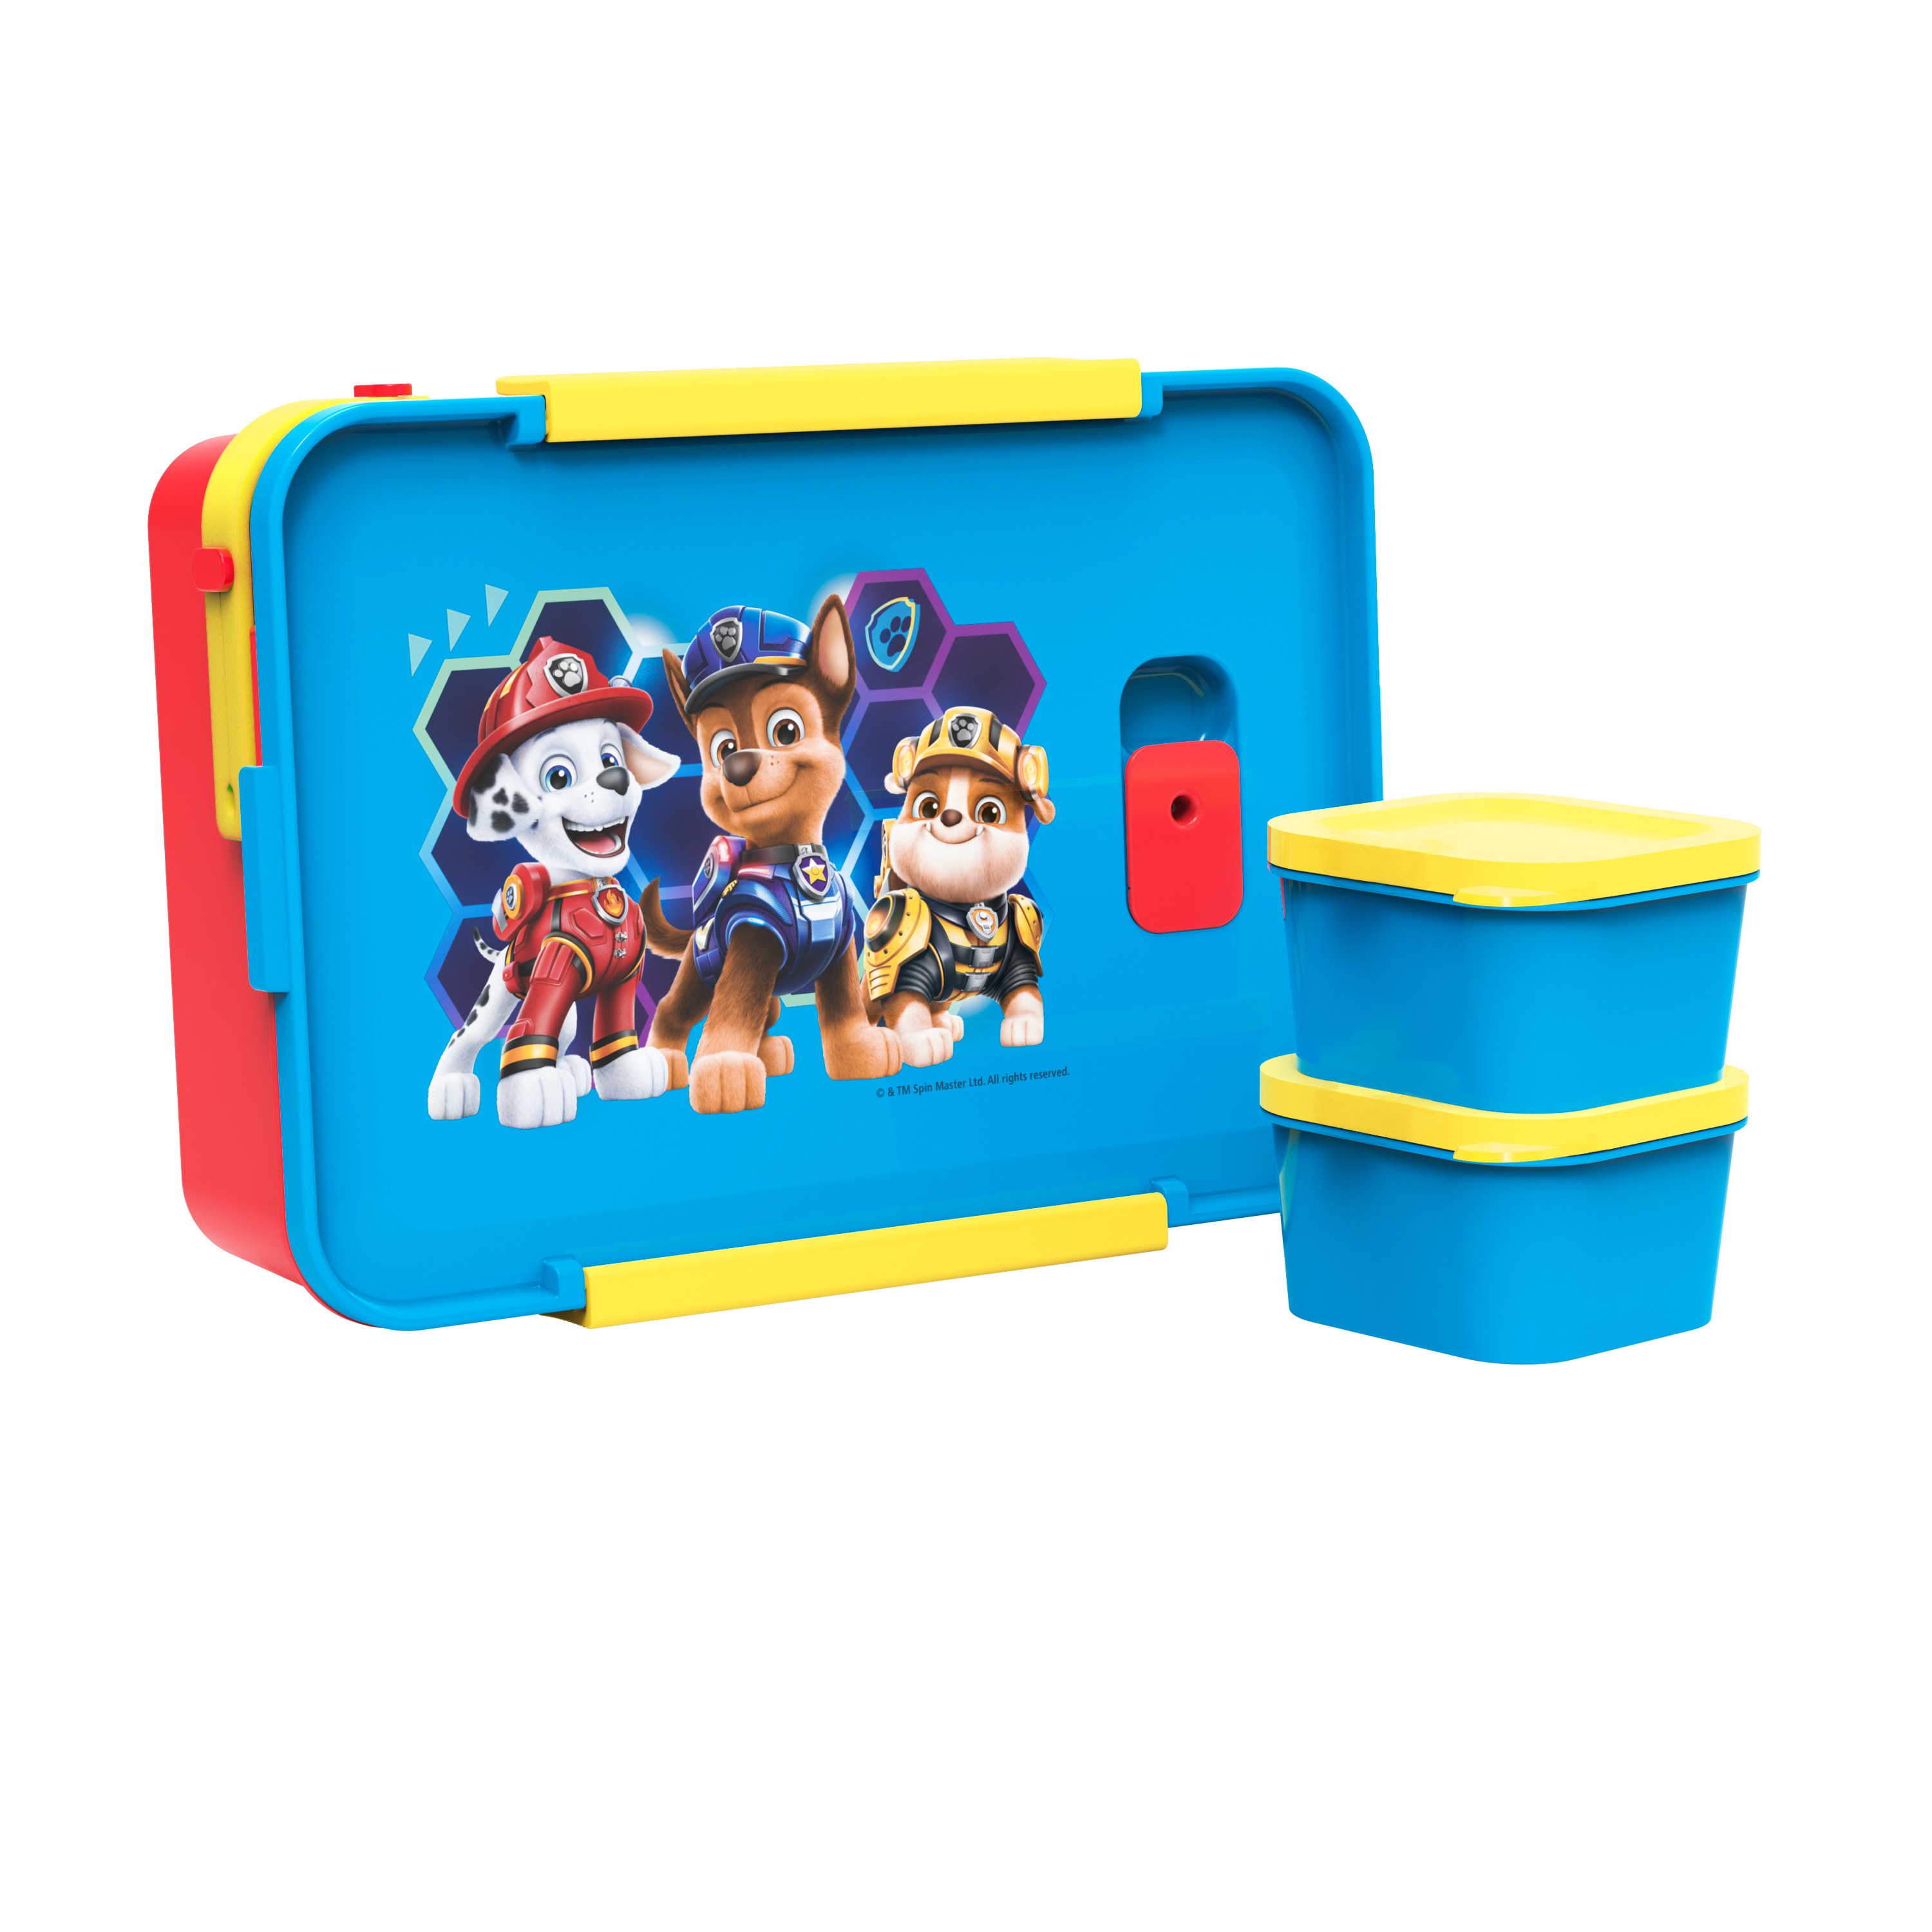 Paw Patrol Movie Reusable Divided Bento Box, Rubble, Marshall and Chase, 3-piece set slideshow image 4